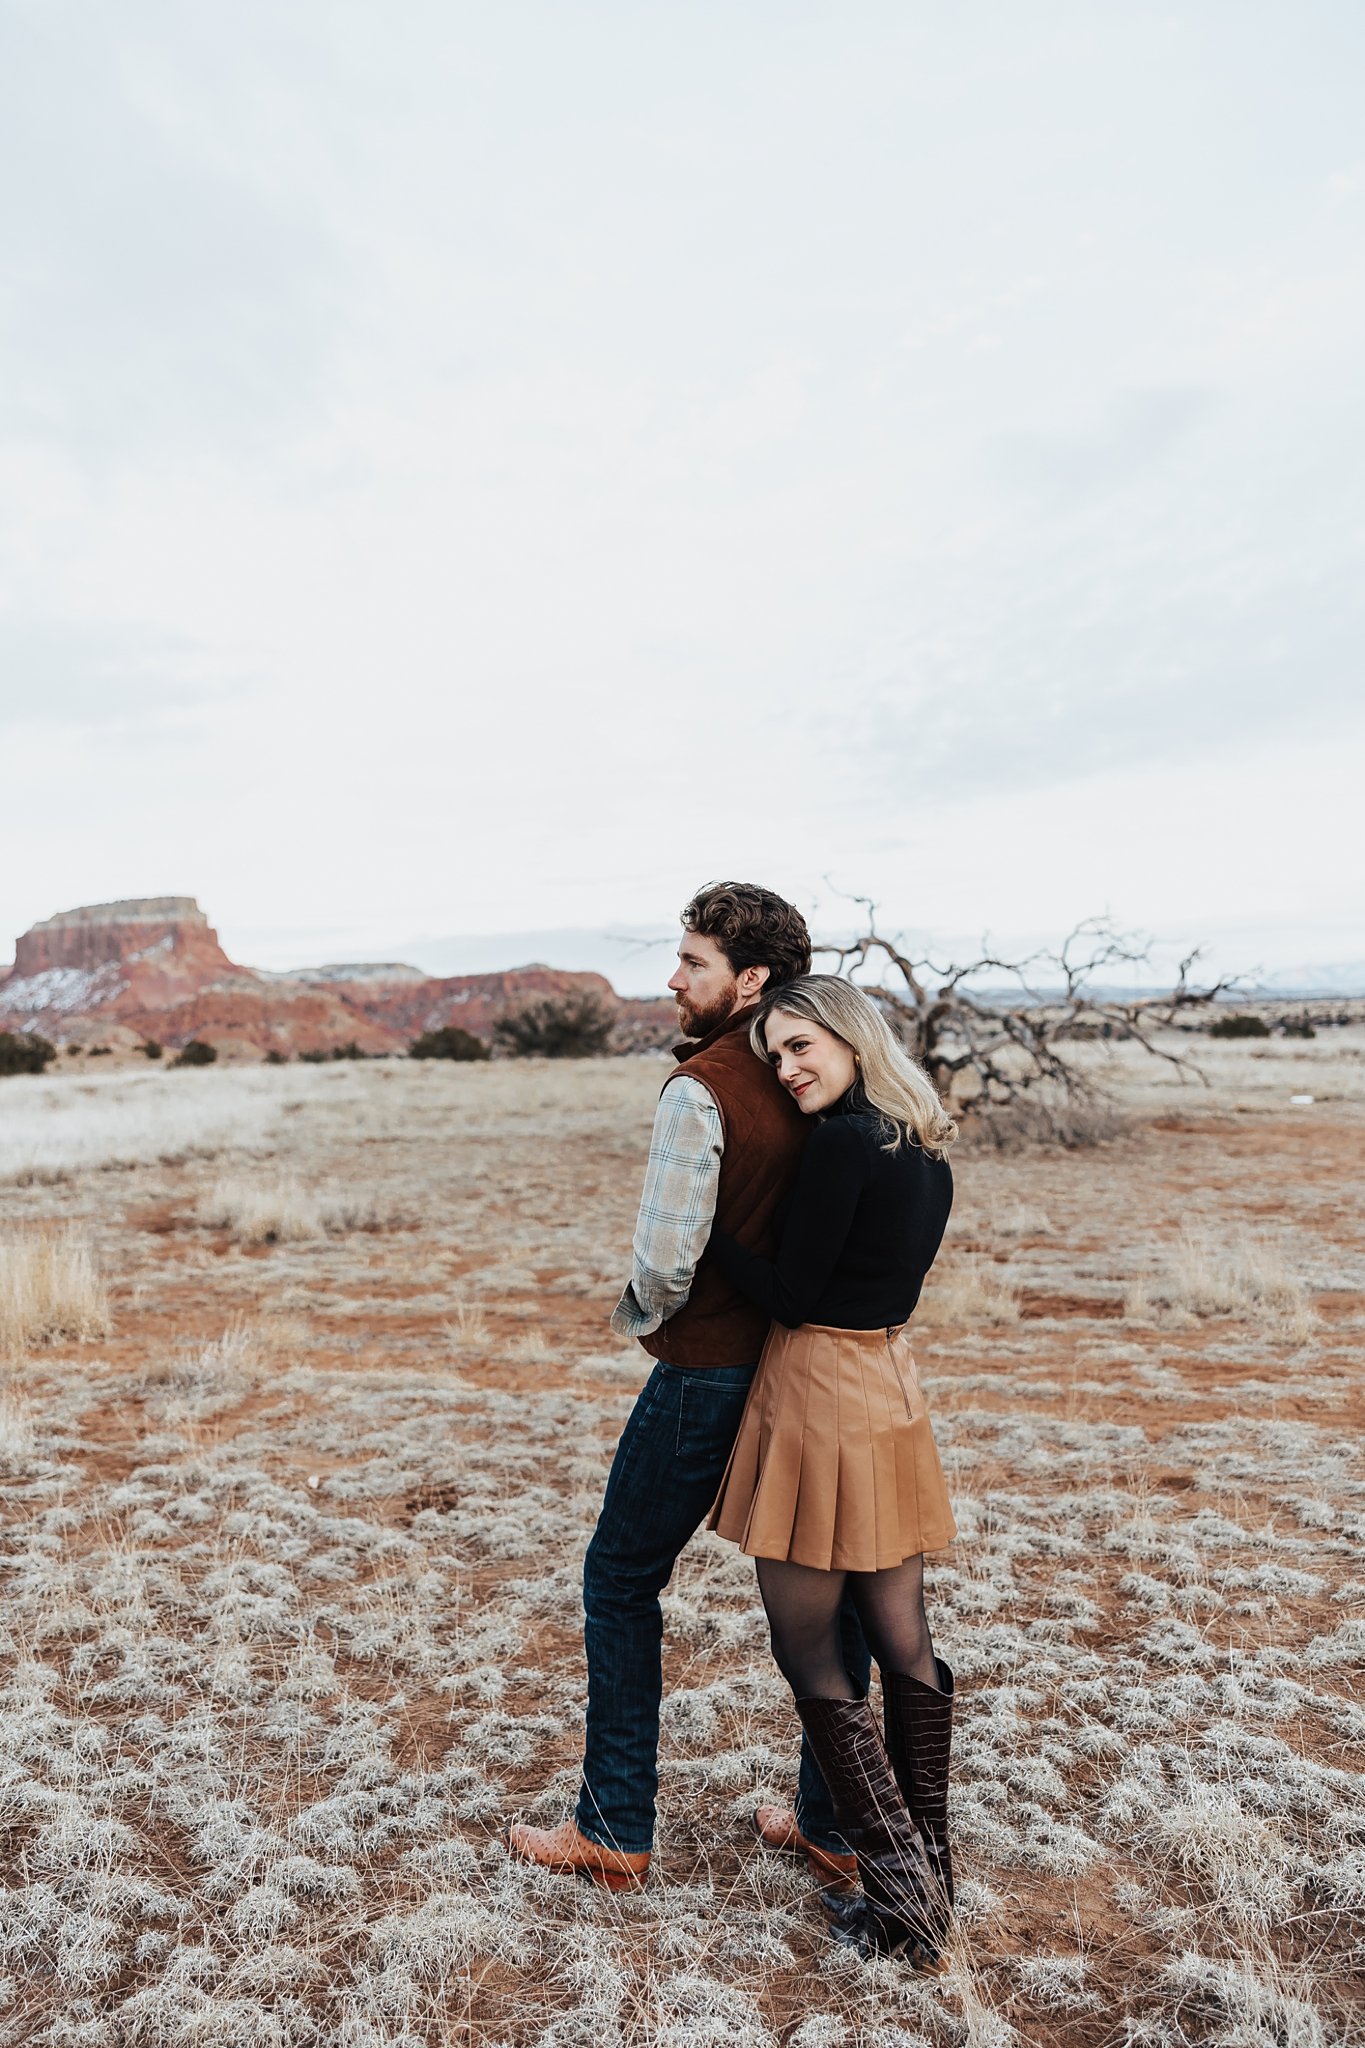 Alicia+lucia+photography+-+albuquerque+wedding+photographer+-+santa+fe+wedding+photography+-+new+mexico+wedding+photographer+-+new+mexico+wedding+-+southwest+engagement+-+ghost+ranch+engagement+-+ghost+ranch+wedding_0091.jpg